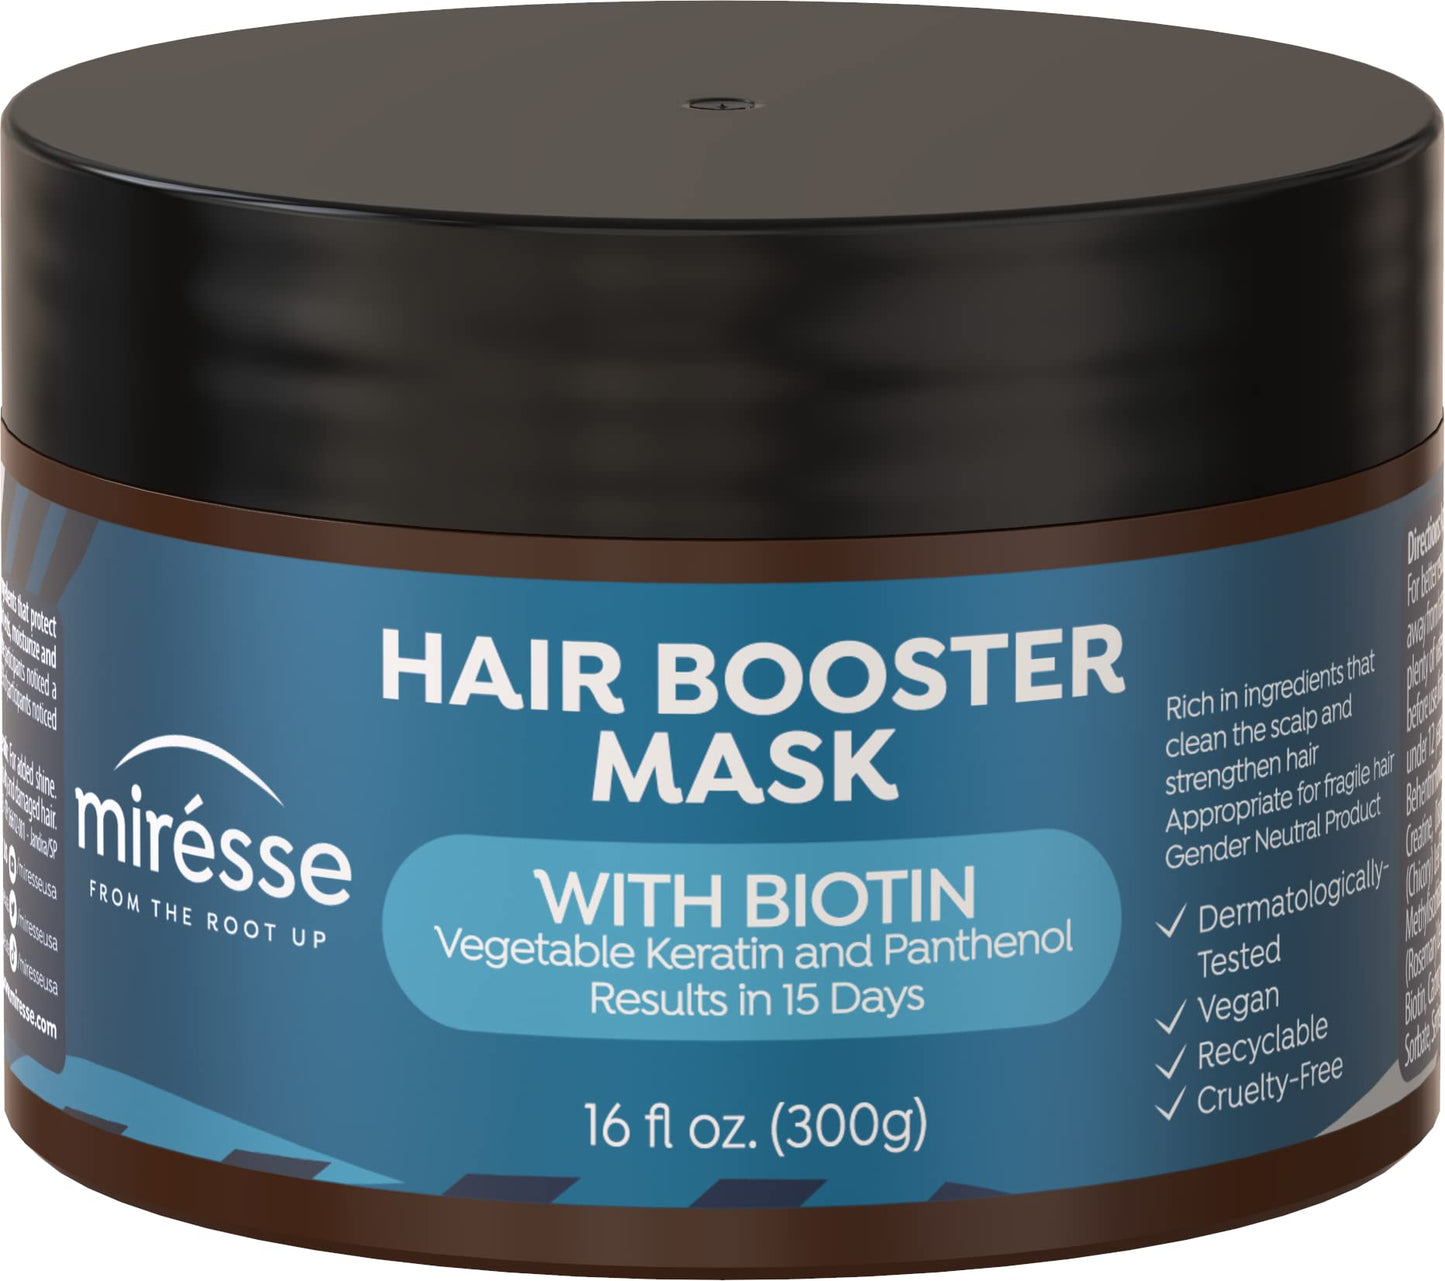 MIRÉSSE - Pack of 2 Biotin Hair Booster Mask - Anti-Thinning Hair Product for Women & Men - Keratin Treatment for Hair Loss - Mask for Hair Growth- Vegan and Cruelty-Free - Proven Results - 20 Fl oz